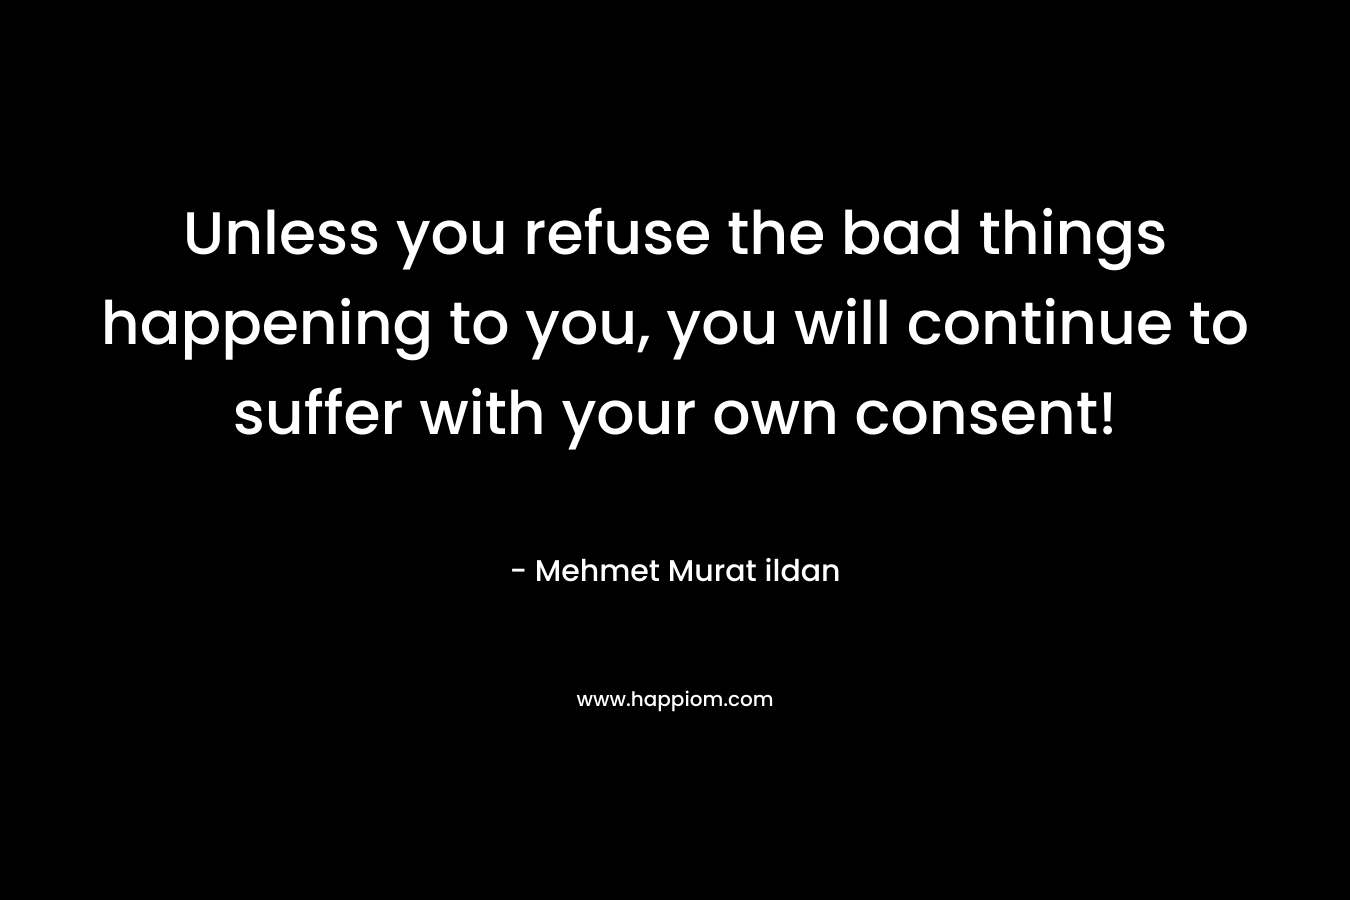 Unless you refuse the bad things happening to you, you will continue to suffer with your own consent!